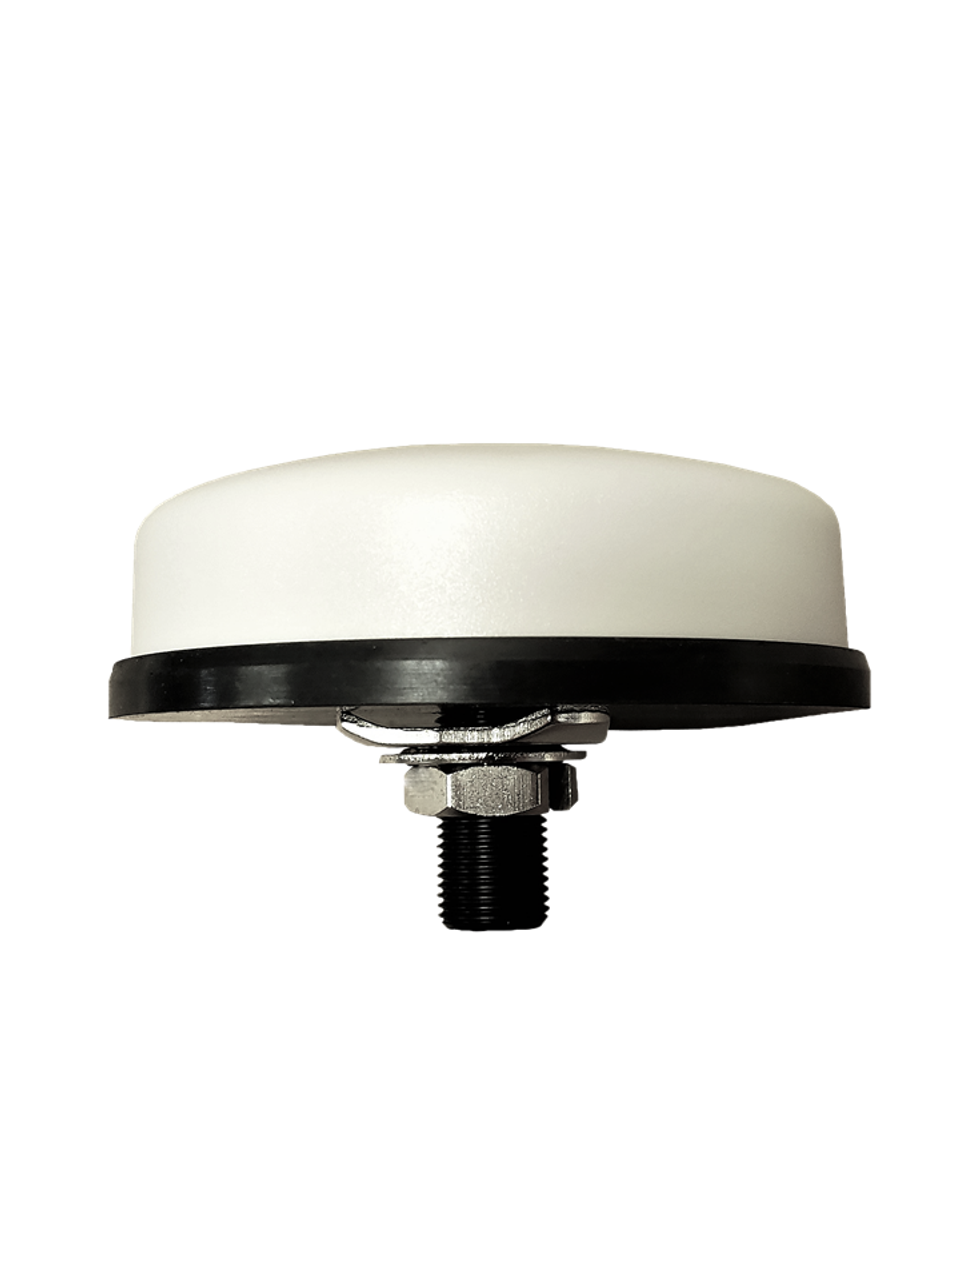 M400 2-Lead MIMO Cellular 3G 4G 5G LTE Bolt Mount M2M IoT Antenna for Inseego SKYUS-140 Gateway